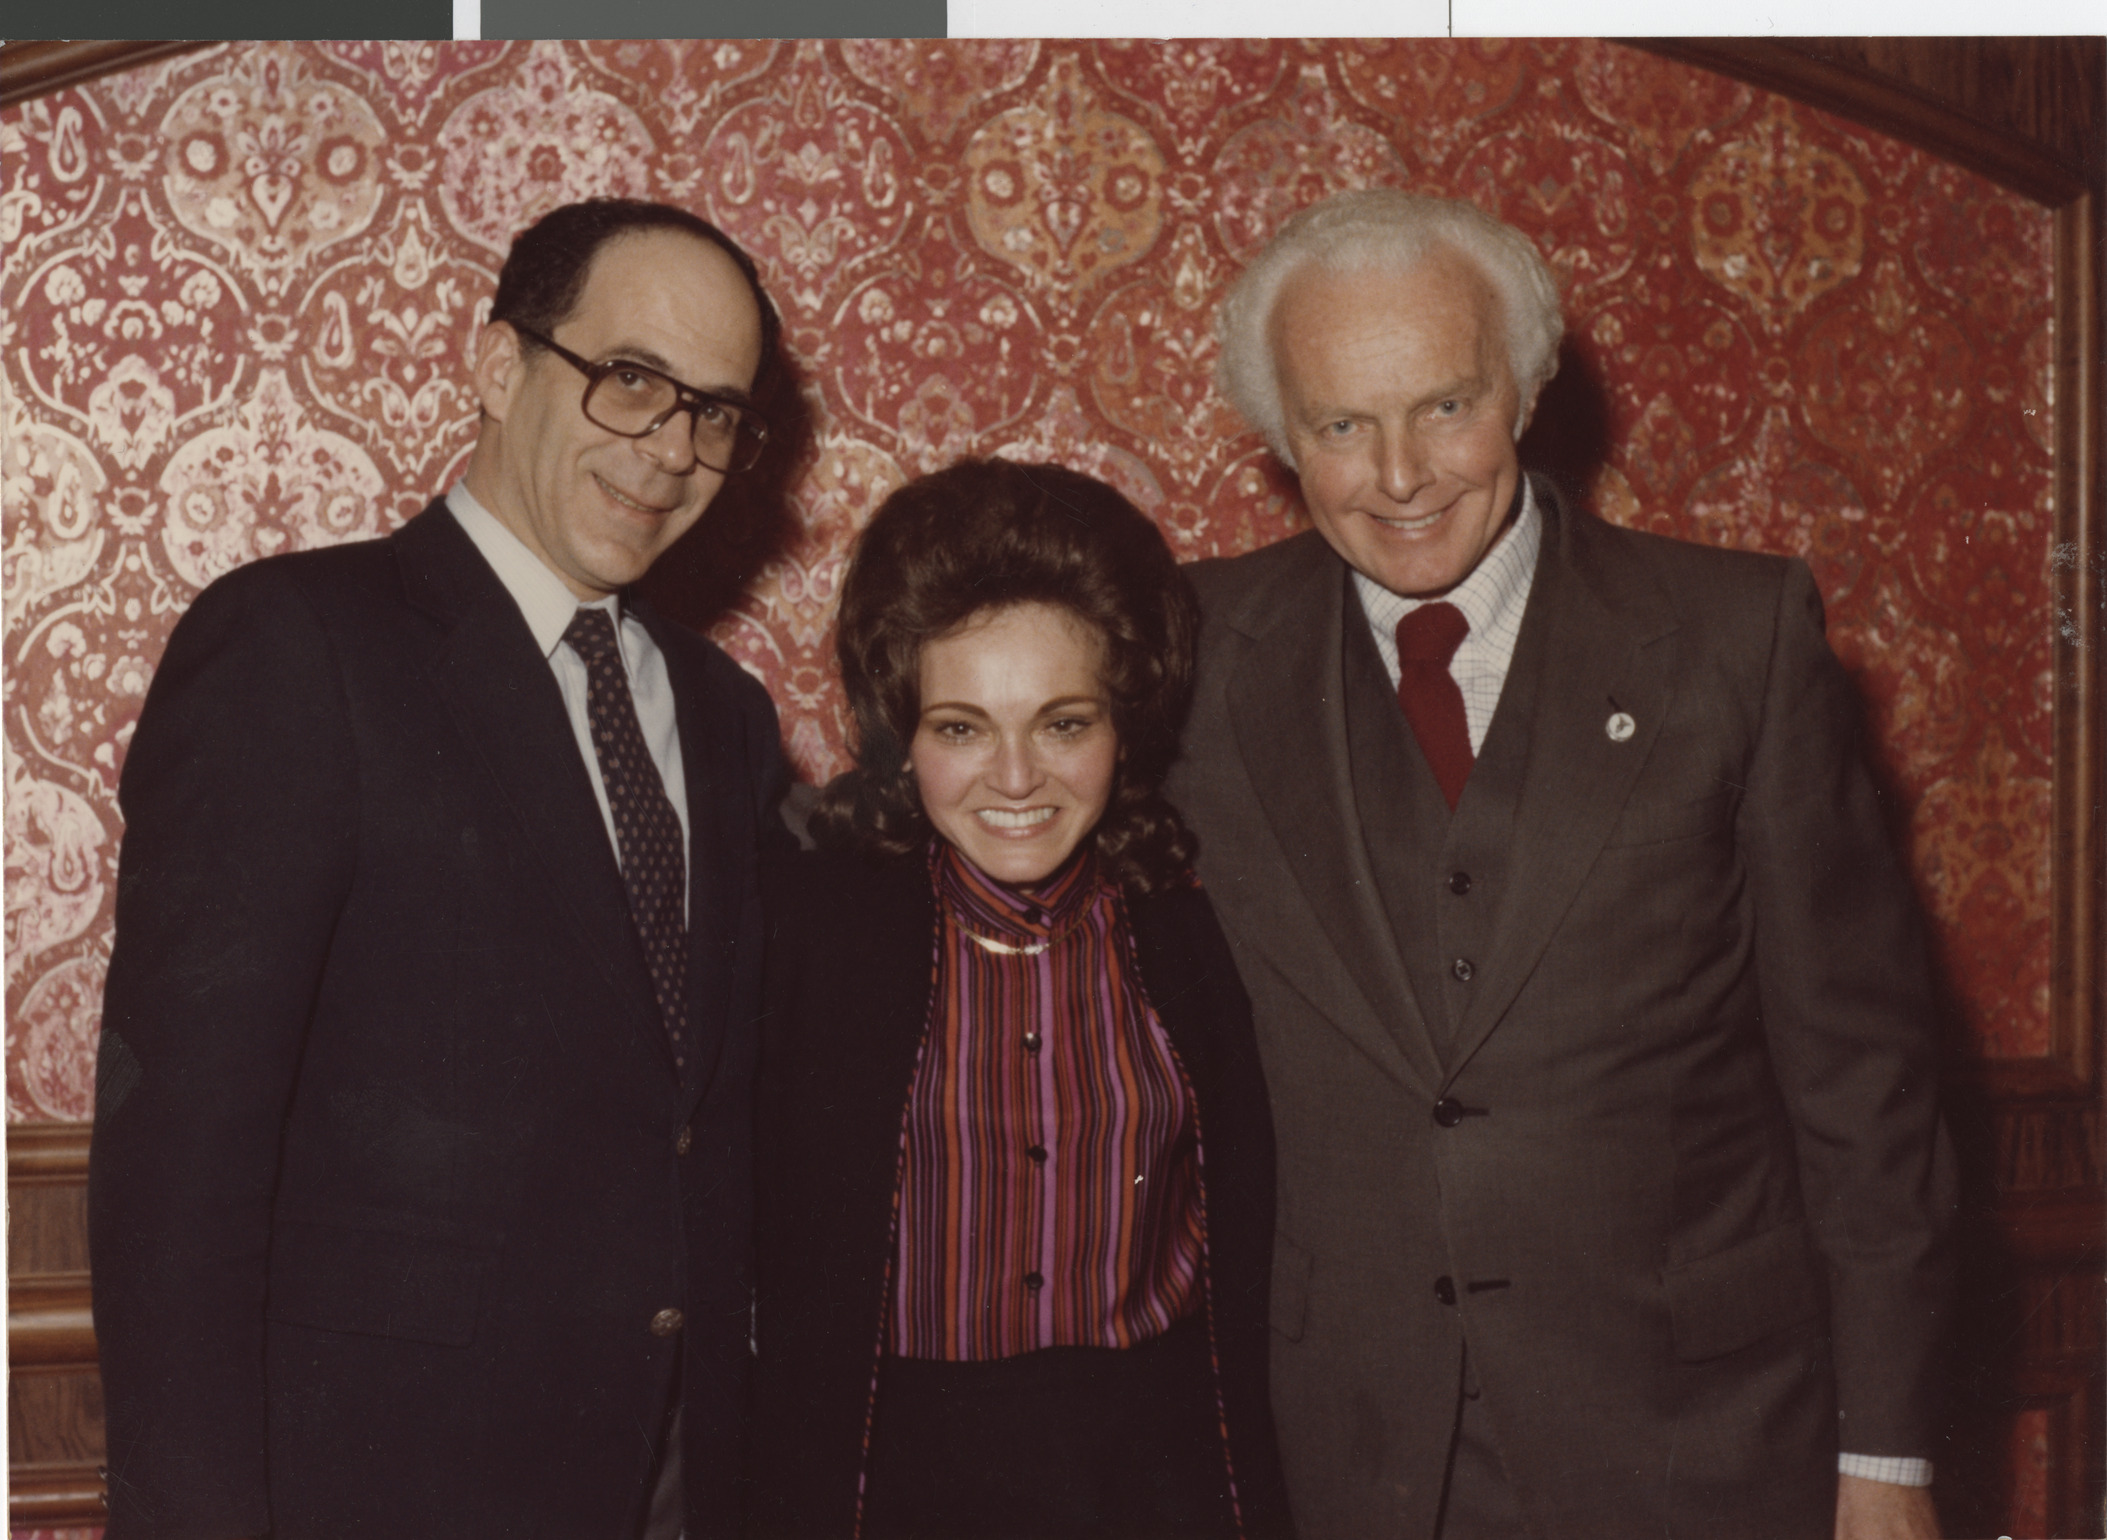 Photograph of Dennis Sabbath with Annette and Tom Lantos, date unknown